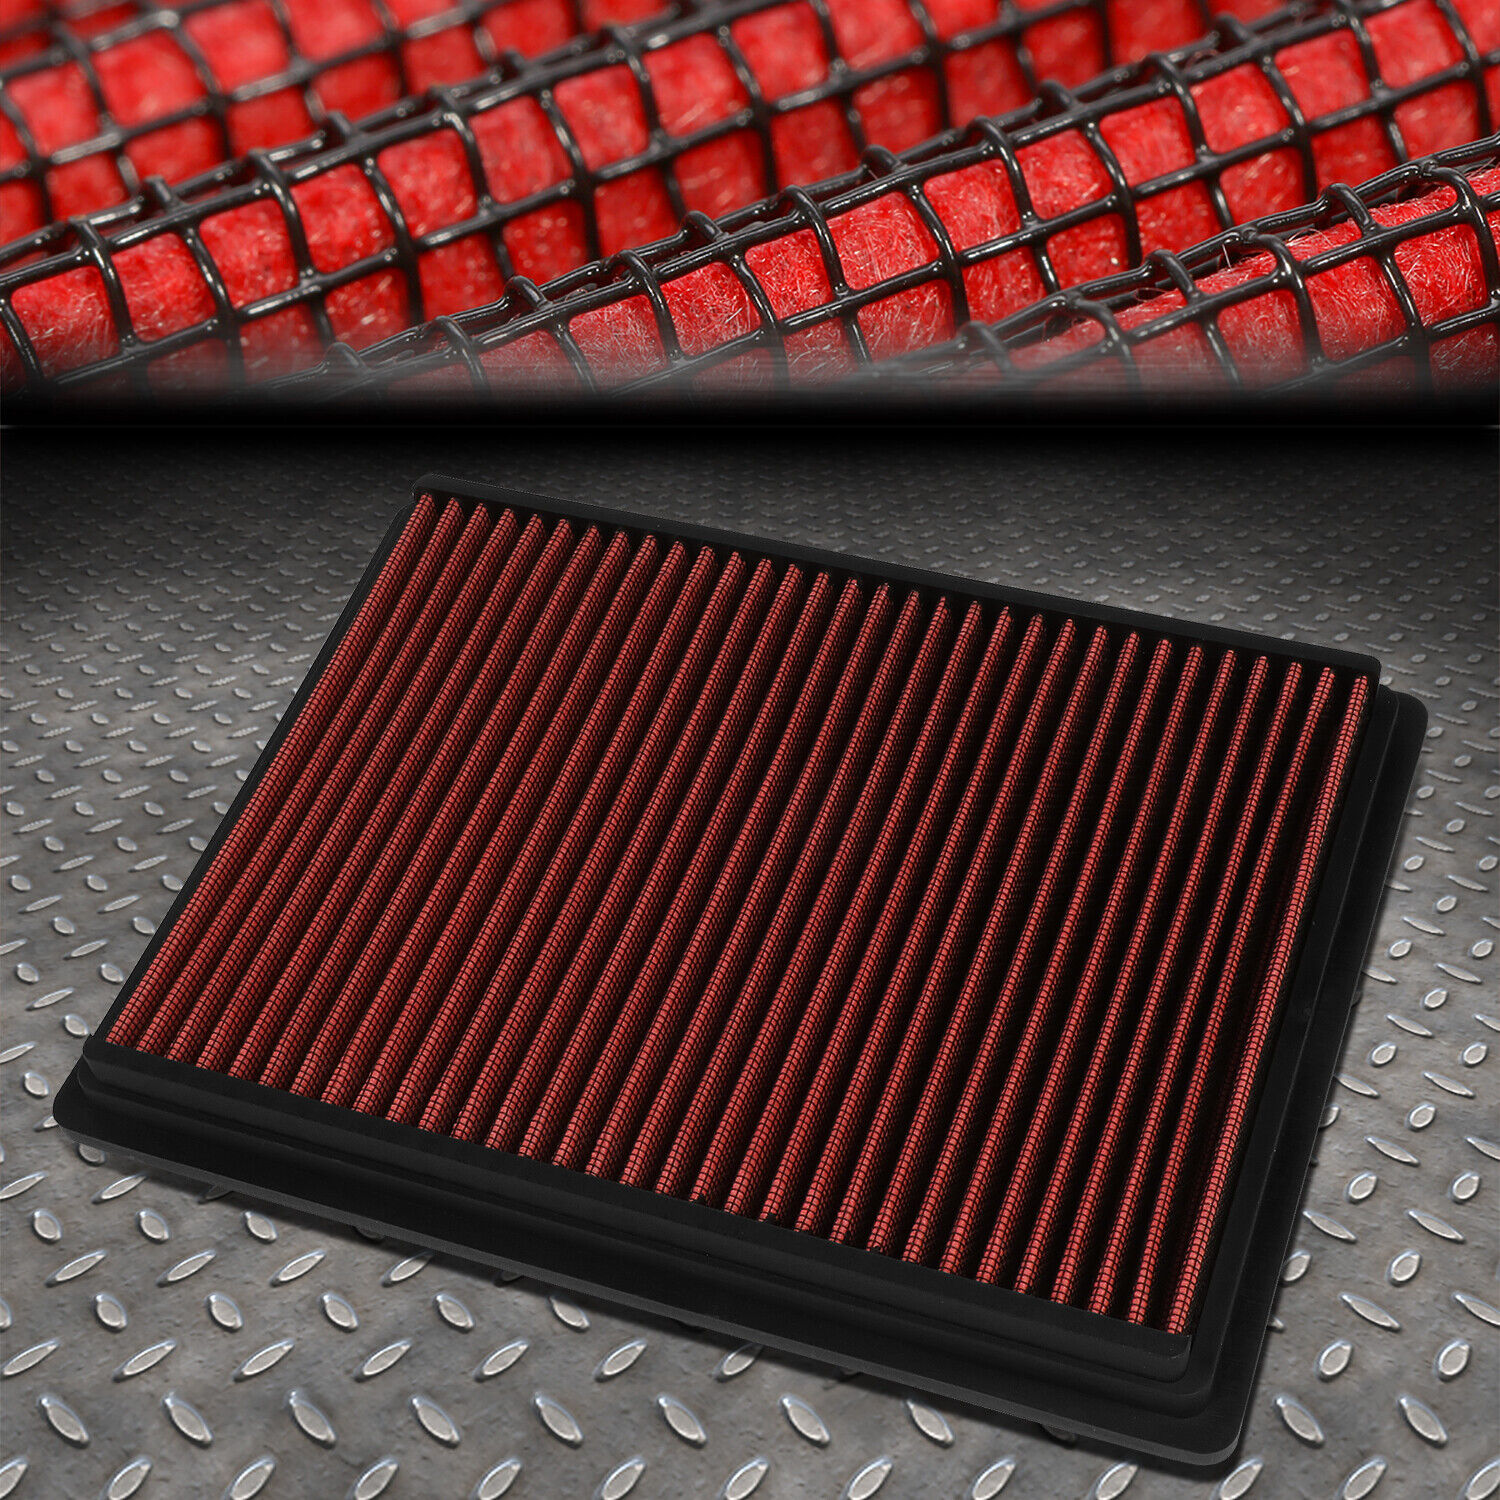 FOR 01-05 CHRYSLER PT CRUISER 2.4L NON TURBO WASHABLE DROP-IN PANEL AIR FILTER